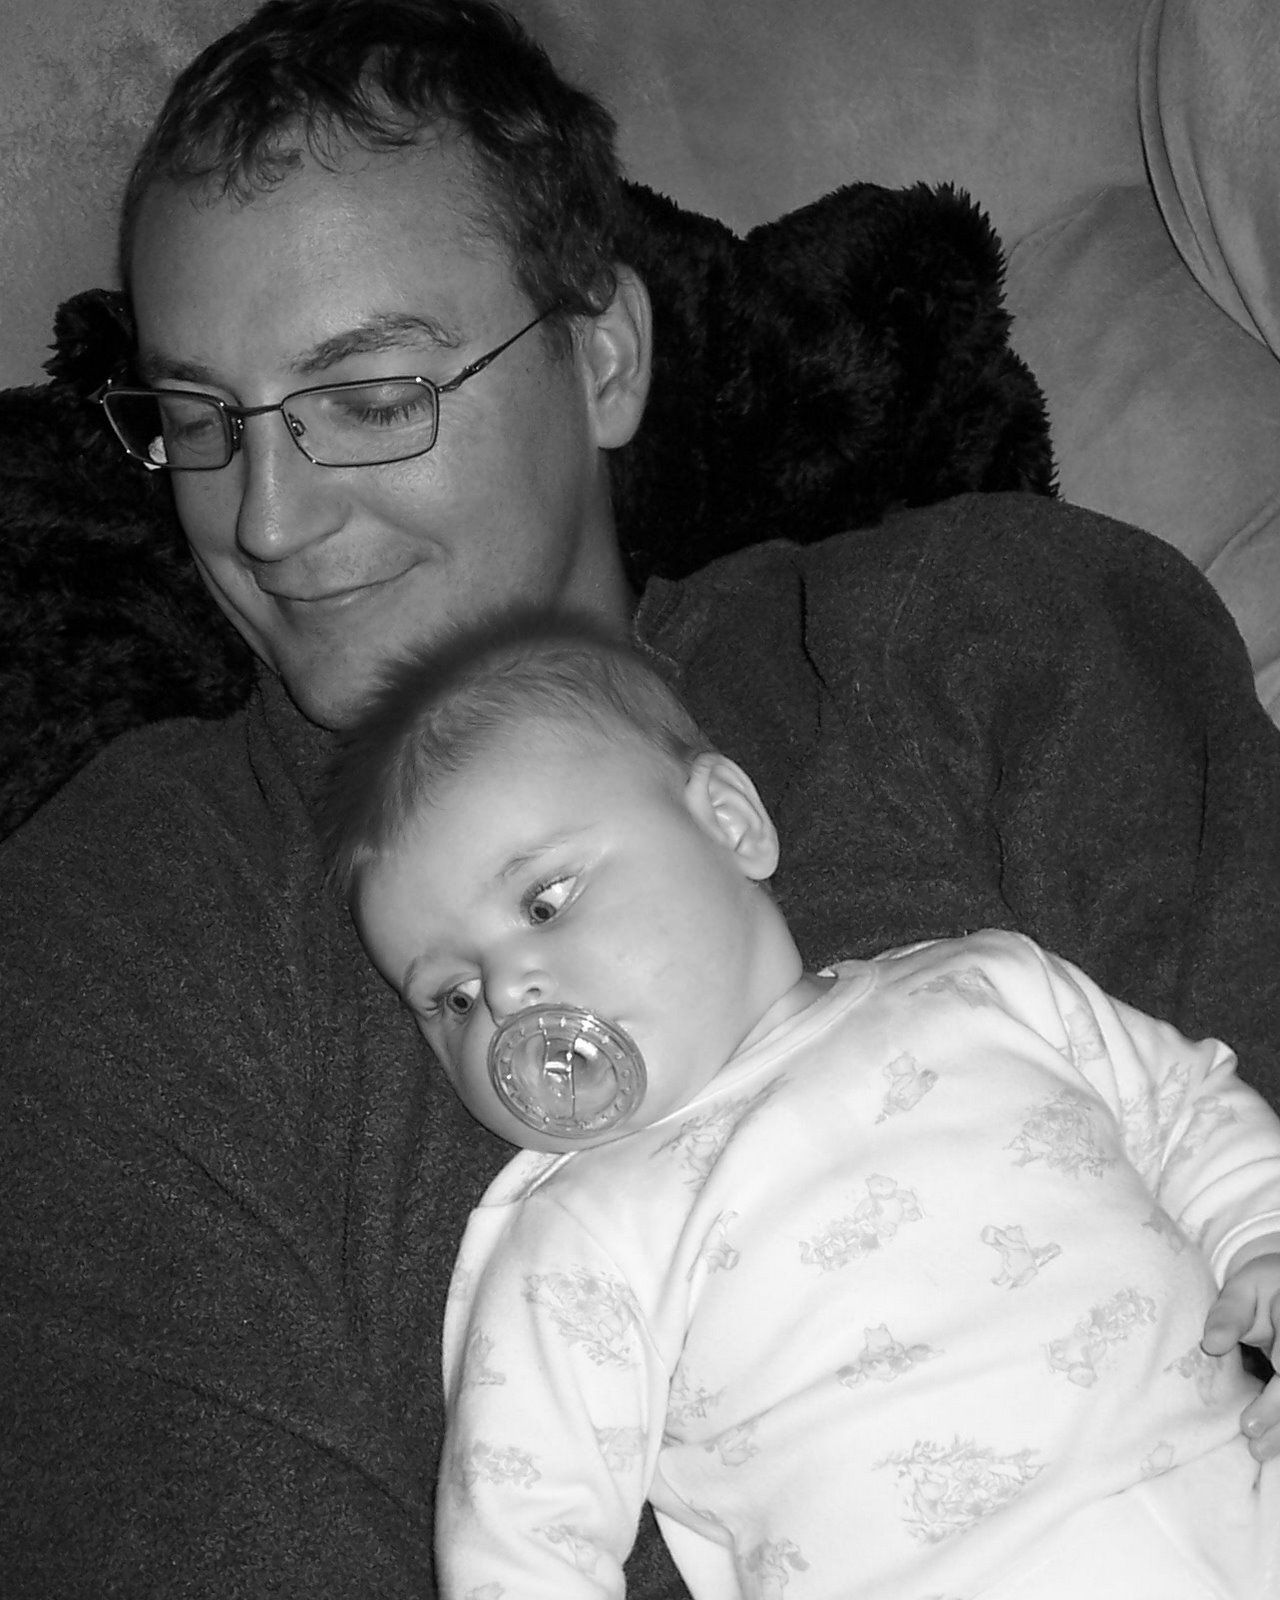 [laying+on+dad+black+and+white.JPG]